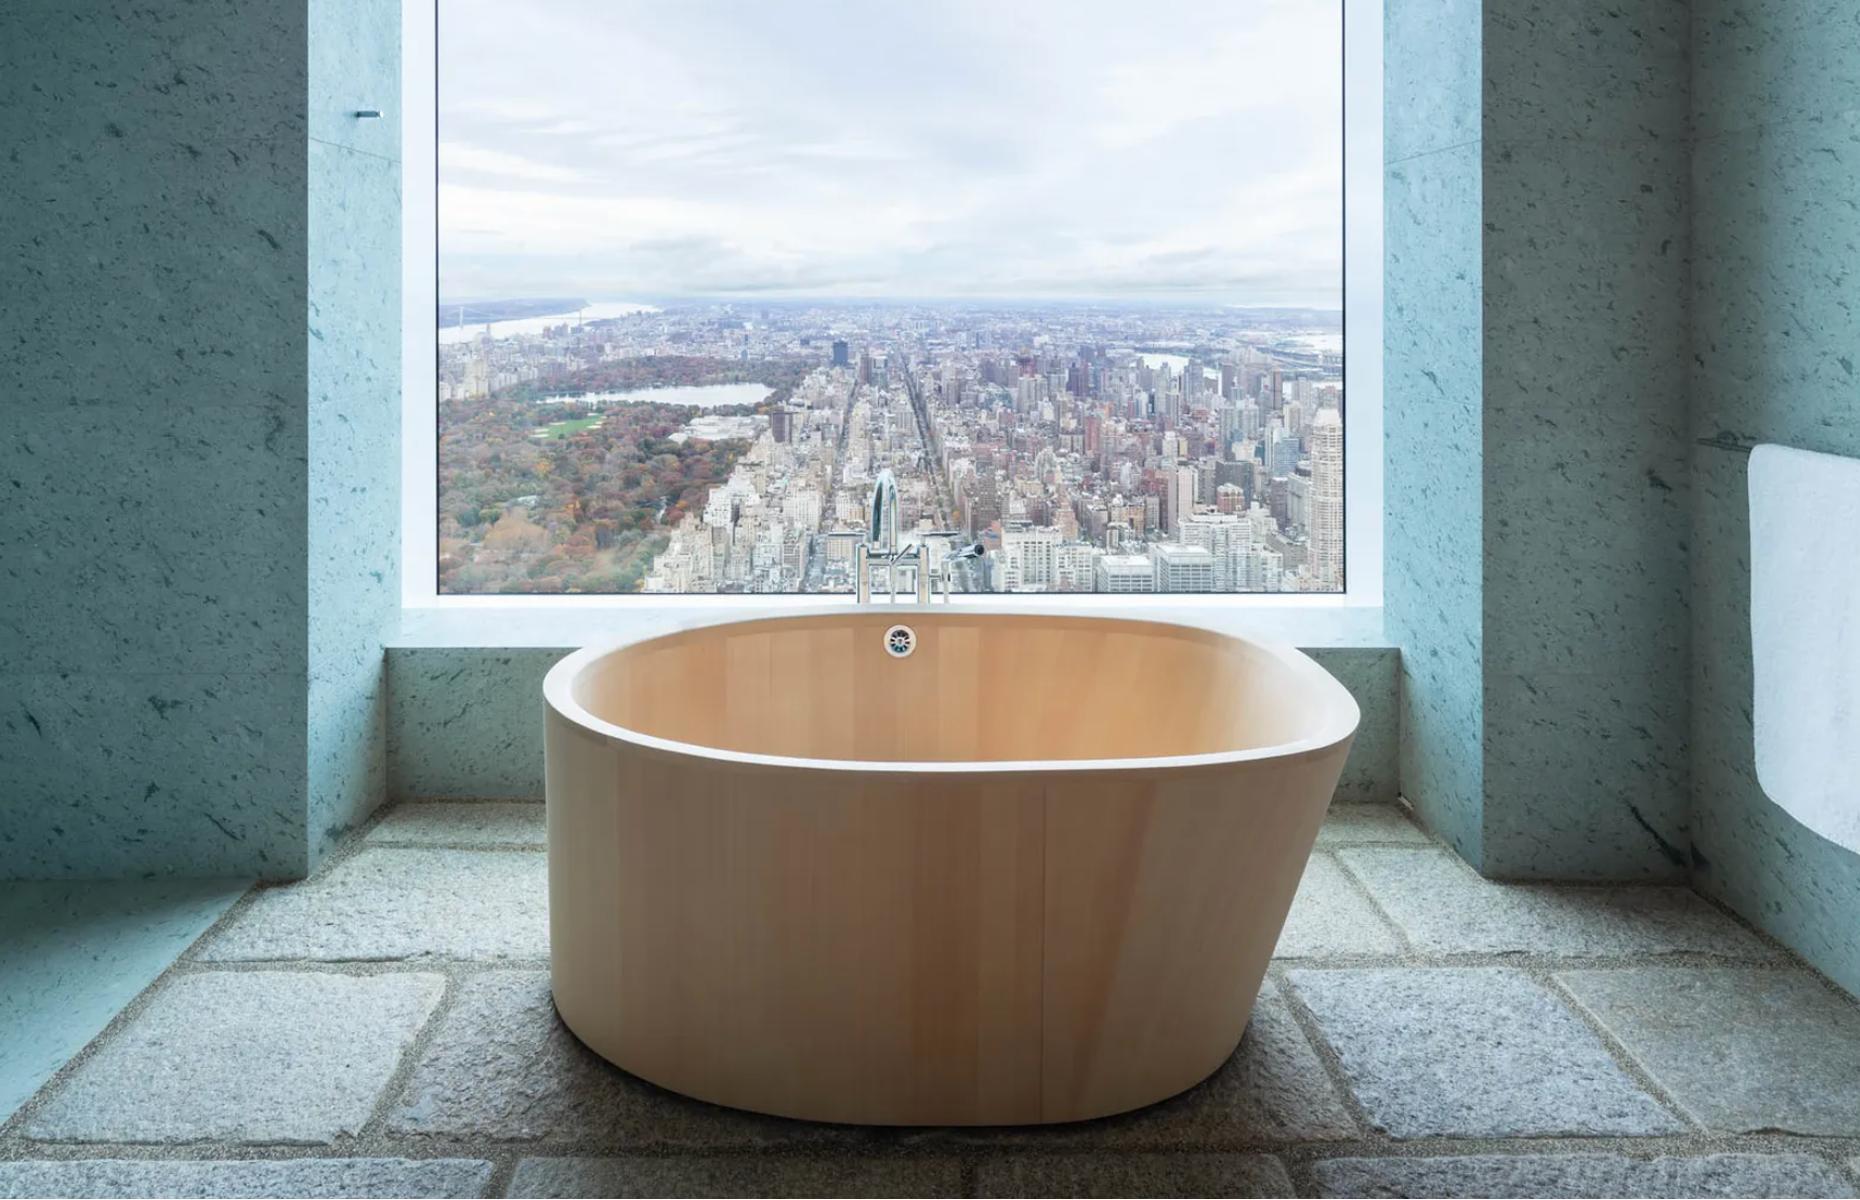 <p>What could be more relaxing than a long soak in this bathtub, which sits on stone tiles that have been sourced from old Kyoto Tram stations? 10-by-ten-foot windows take in dramatic views of Central Park and beyond. Plus, this building attracts the rich and famous, as past residents have included Jennifer Lopez and Alex Rodriguez, who sold their apartment here in 2019 for $15.8 million. </p>  <p><strong>Liked this? Click on the Follow button above for more great stories from loveMONEY</strong></p>